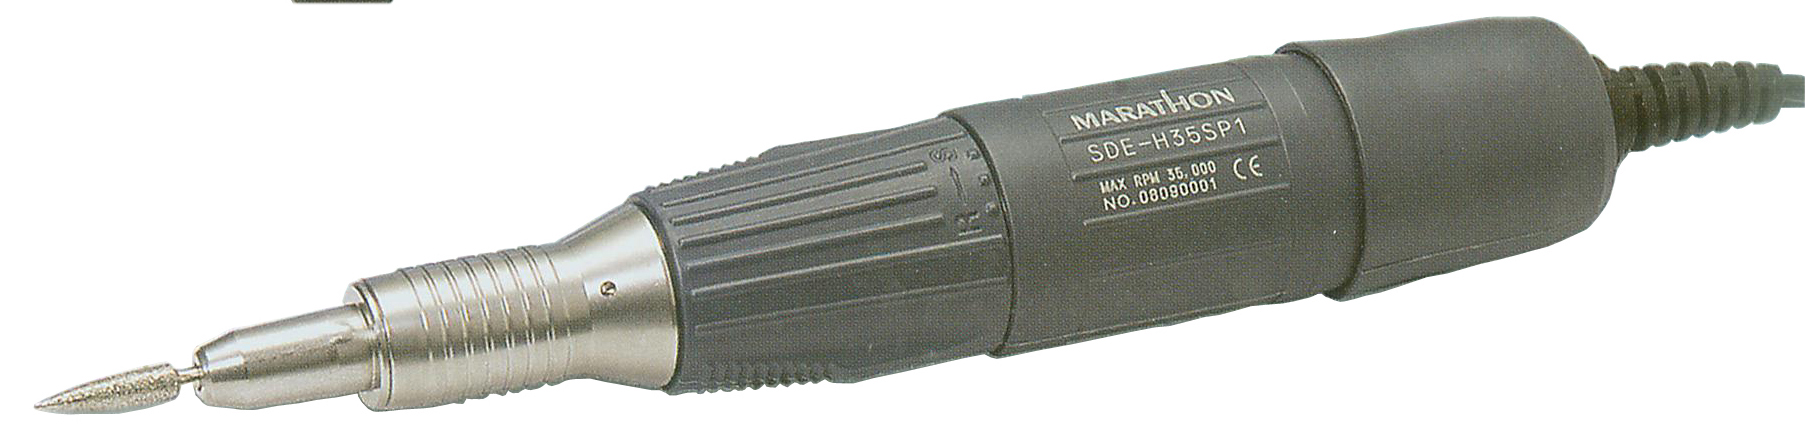 EXTRA HAND PIECE FOR M01050-60 Saeyang # sde-h35sp1